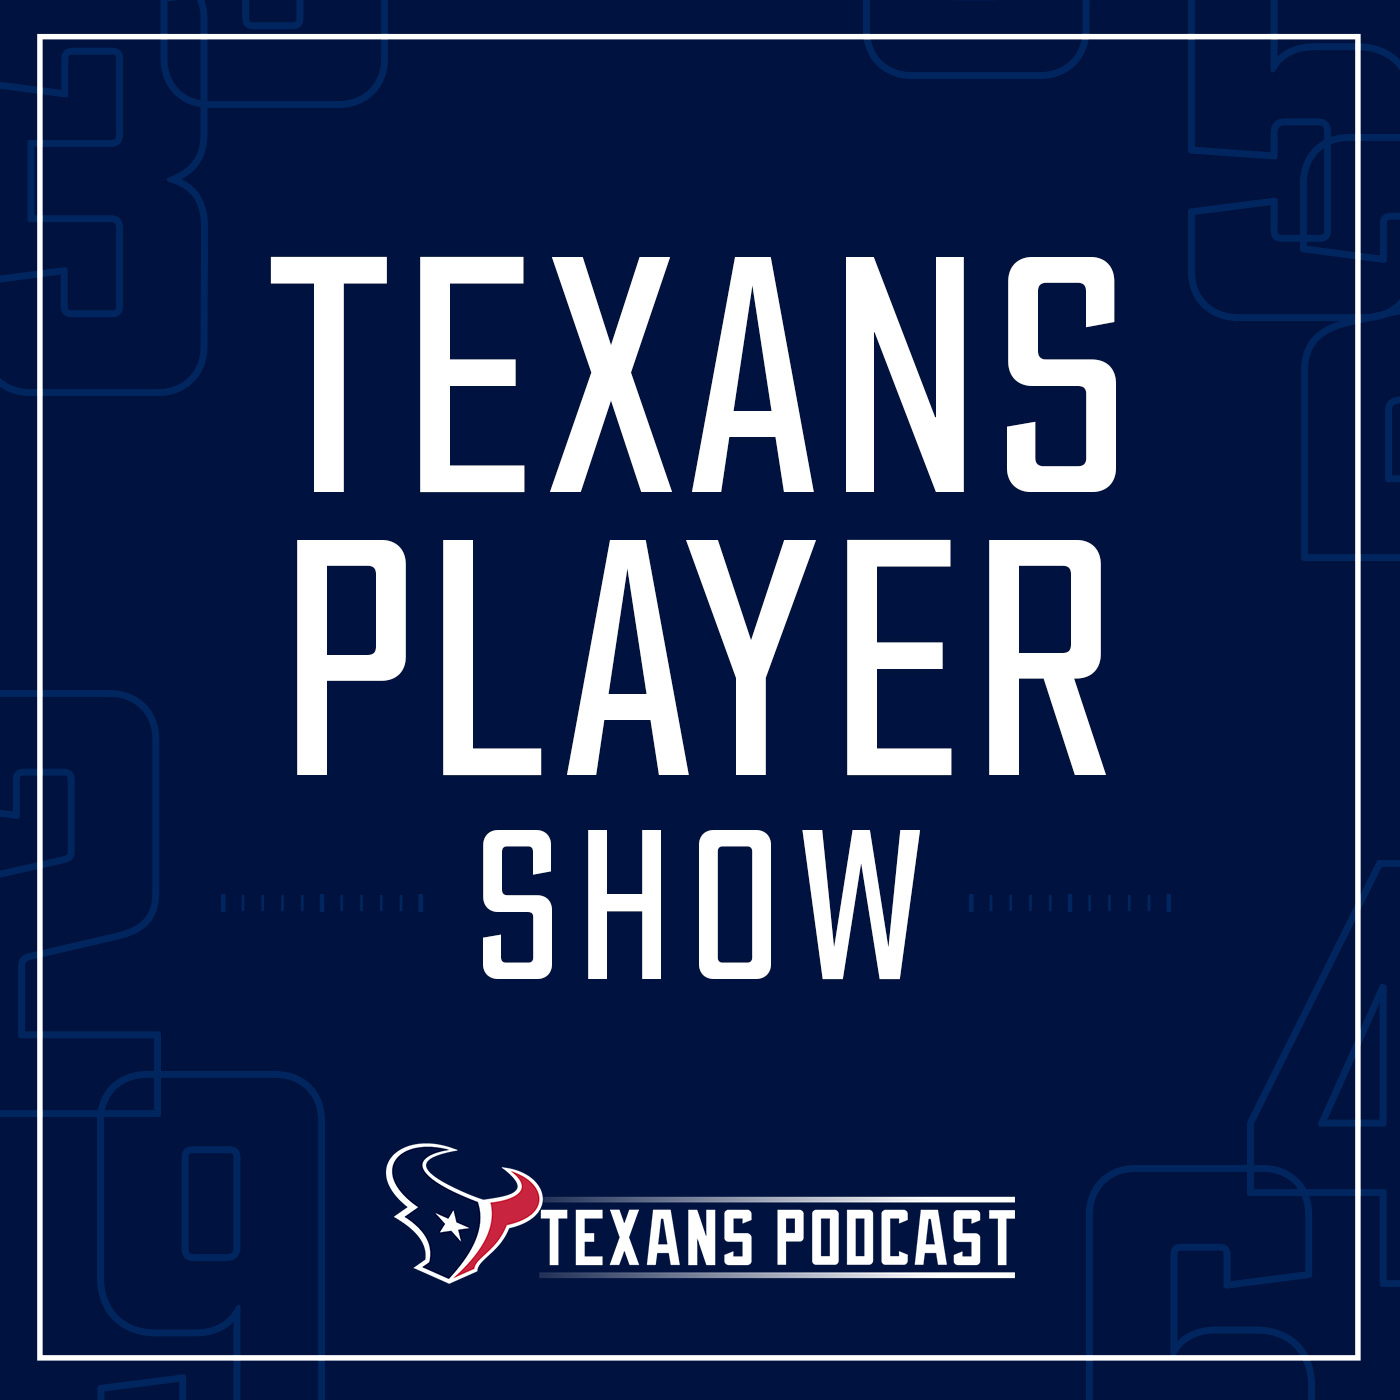 Chris Moore | Texans Player Show